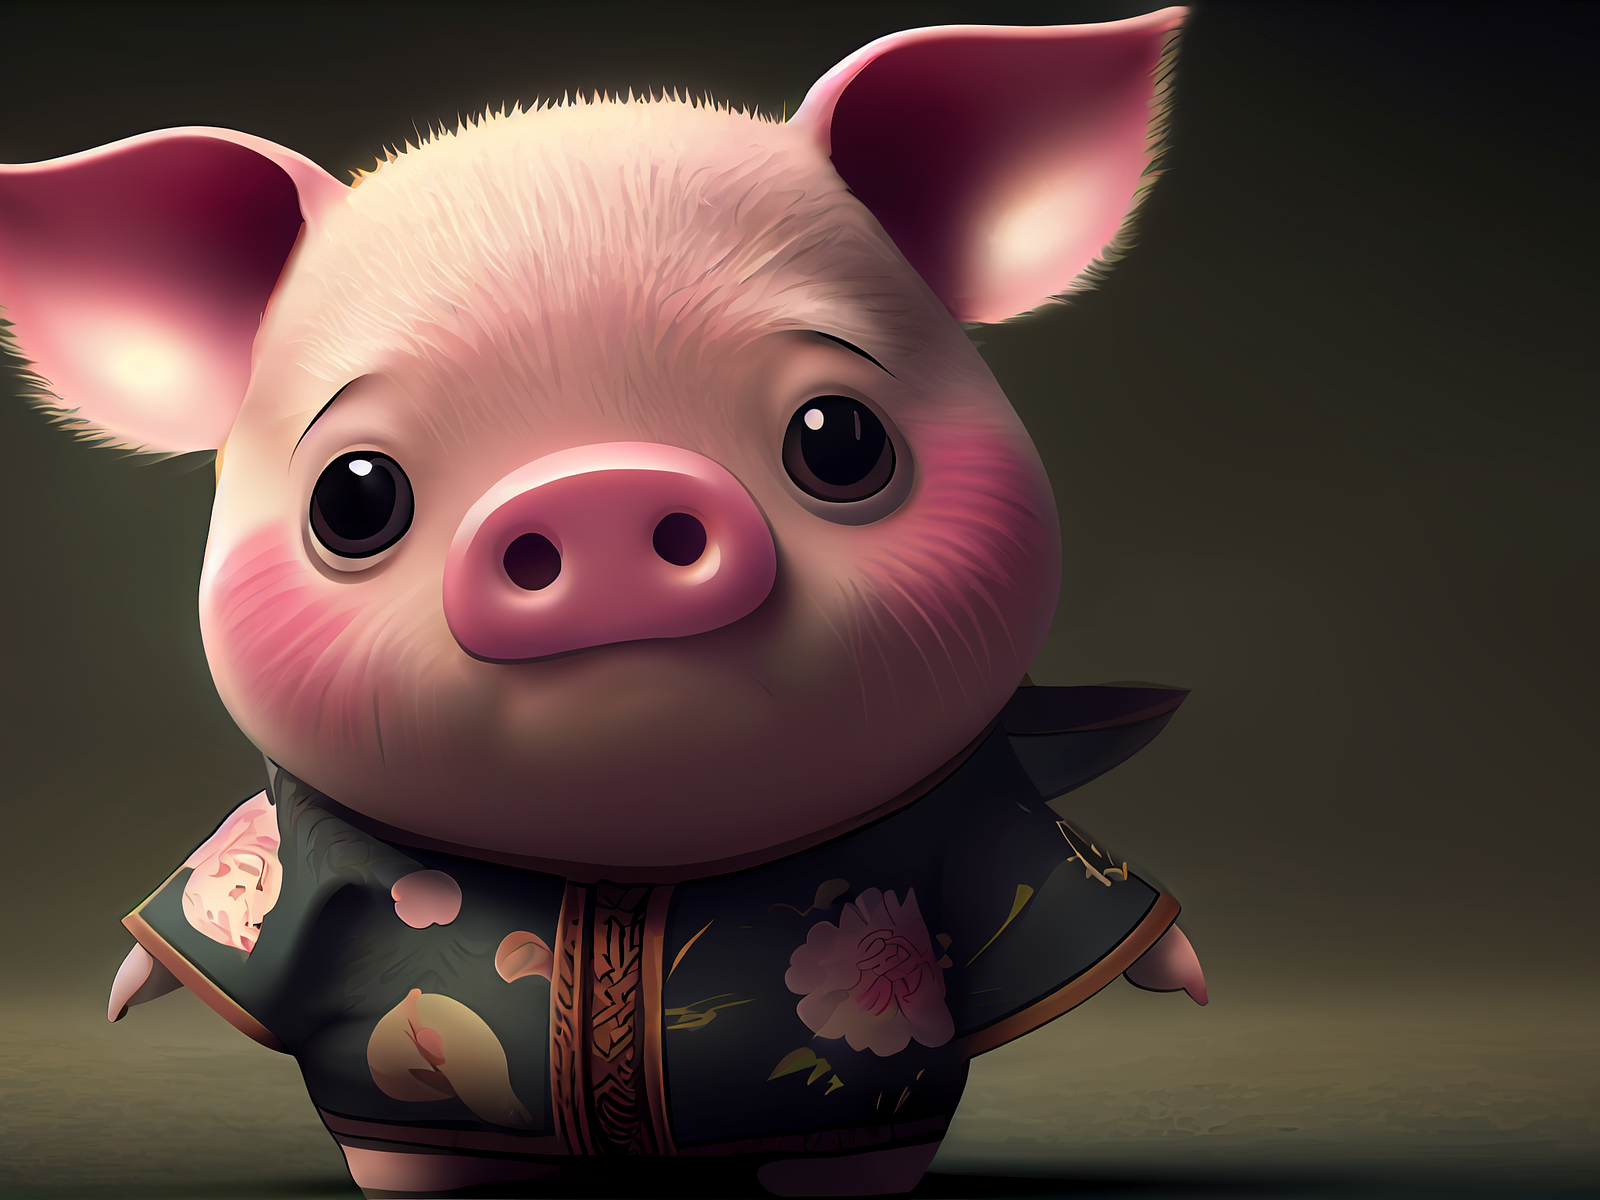 Pinky Pig by Beehaya on Dribbble